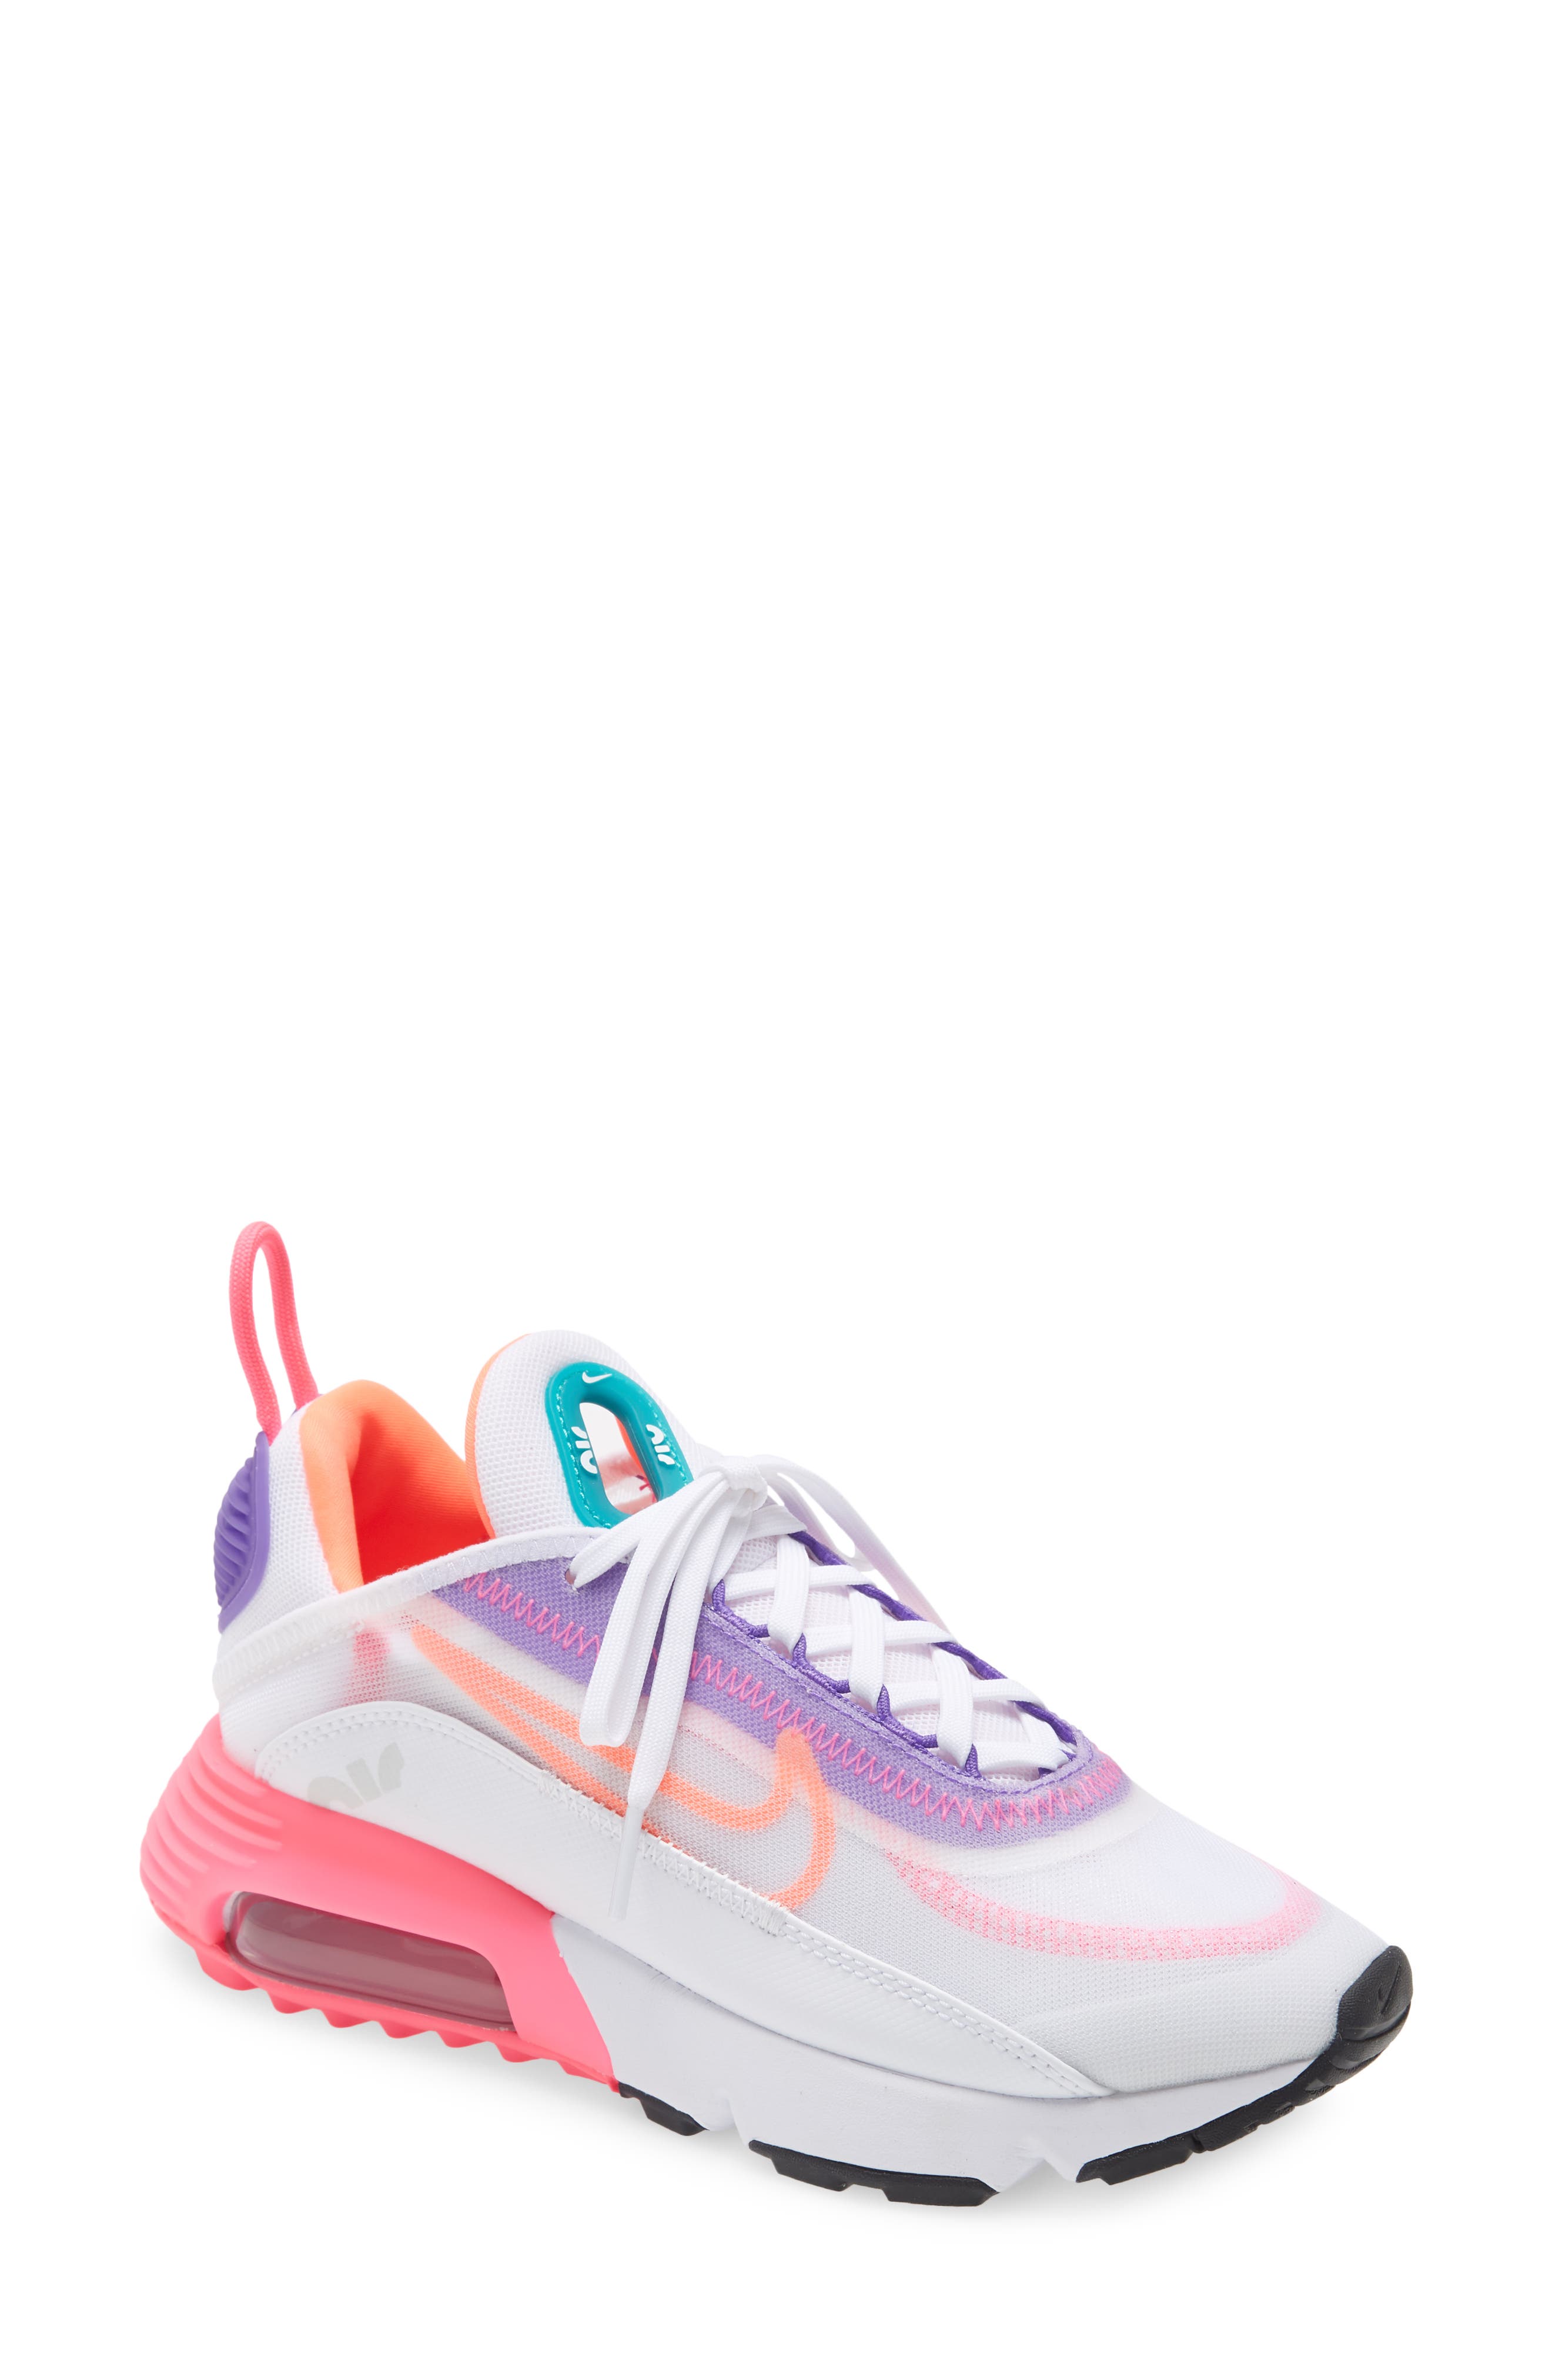 air max off white nordstrom